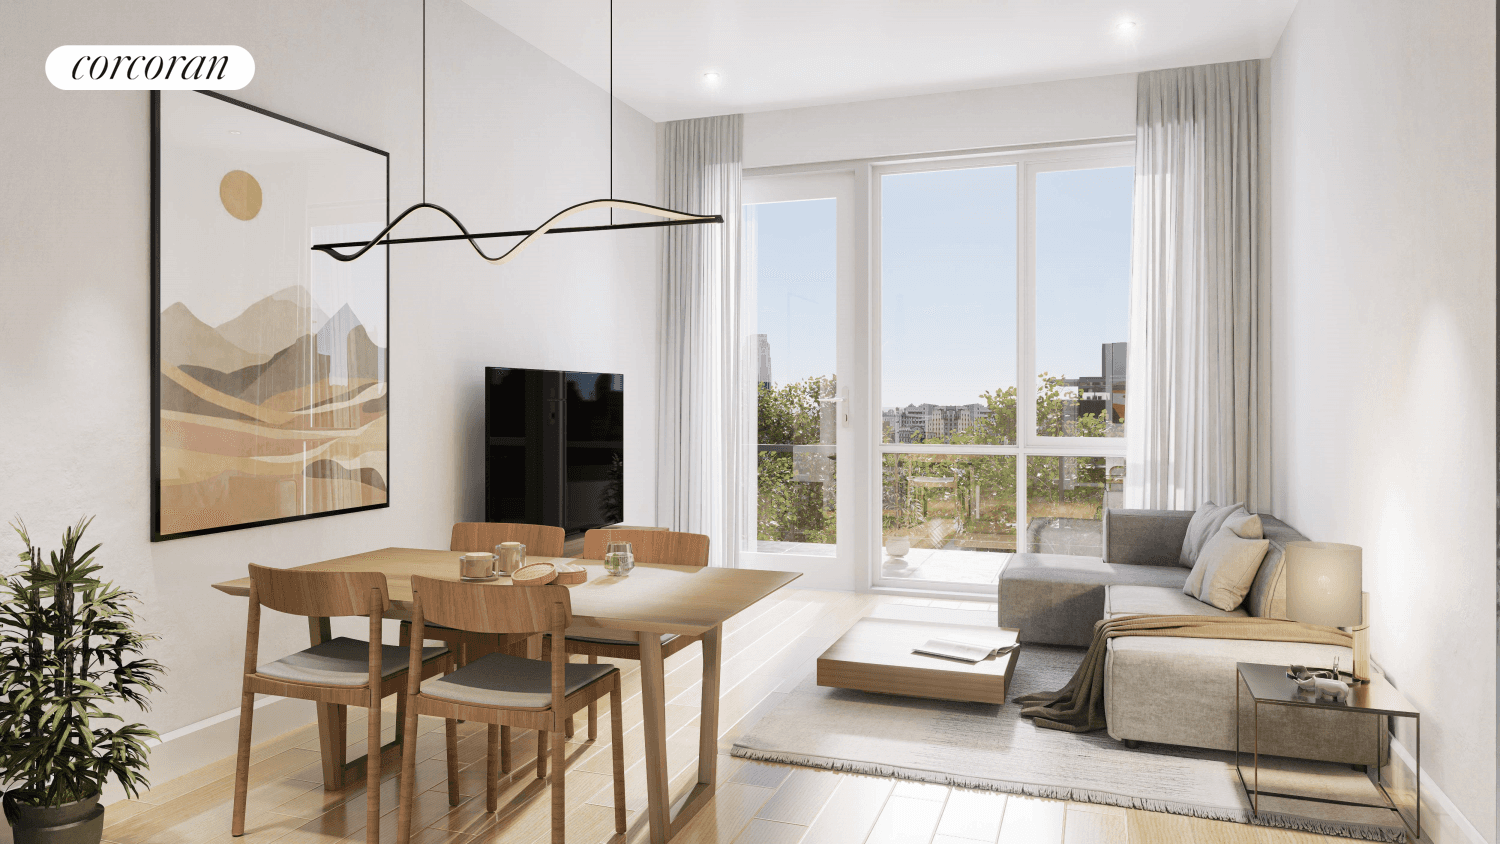 PREVIEWS COMMENCE, FEB 1 Bathed in sunlight and perfectly at home in Prospect Lefferts Gardens, The Rogers Residences is the first in a new generation of luxury condominiums.